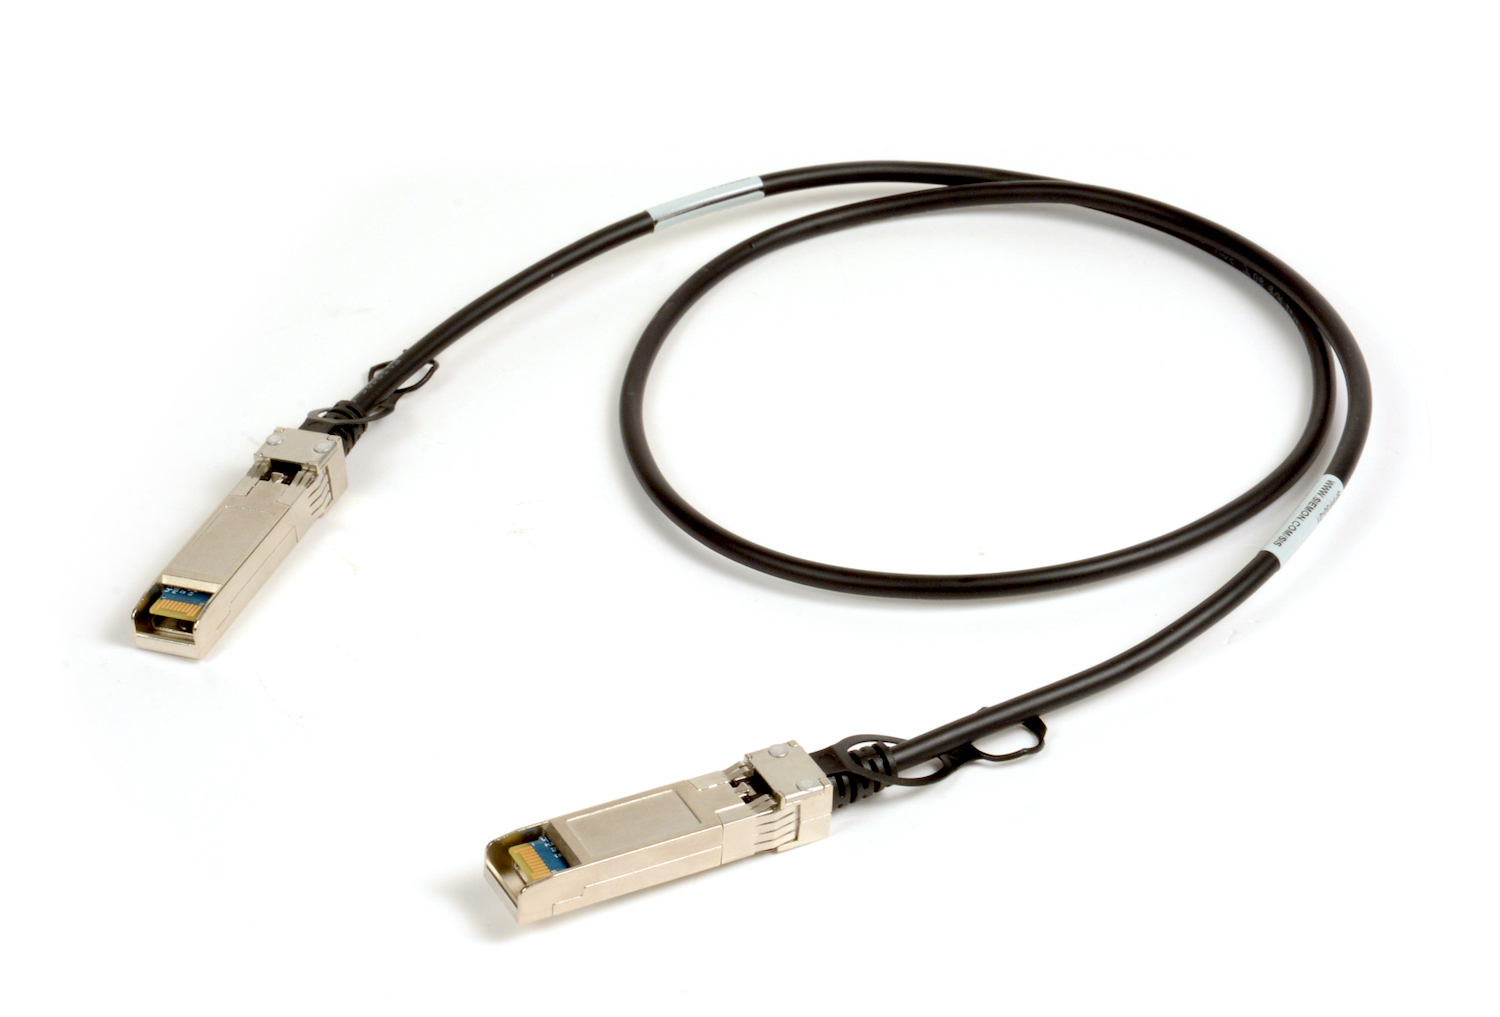 High-Speed Connector and Cable Products: Siemon’s SFP28-to-SFP28 Direct-Attach Passive Copper Cable Assemblies 